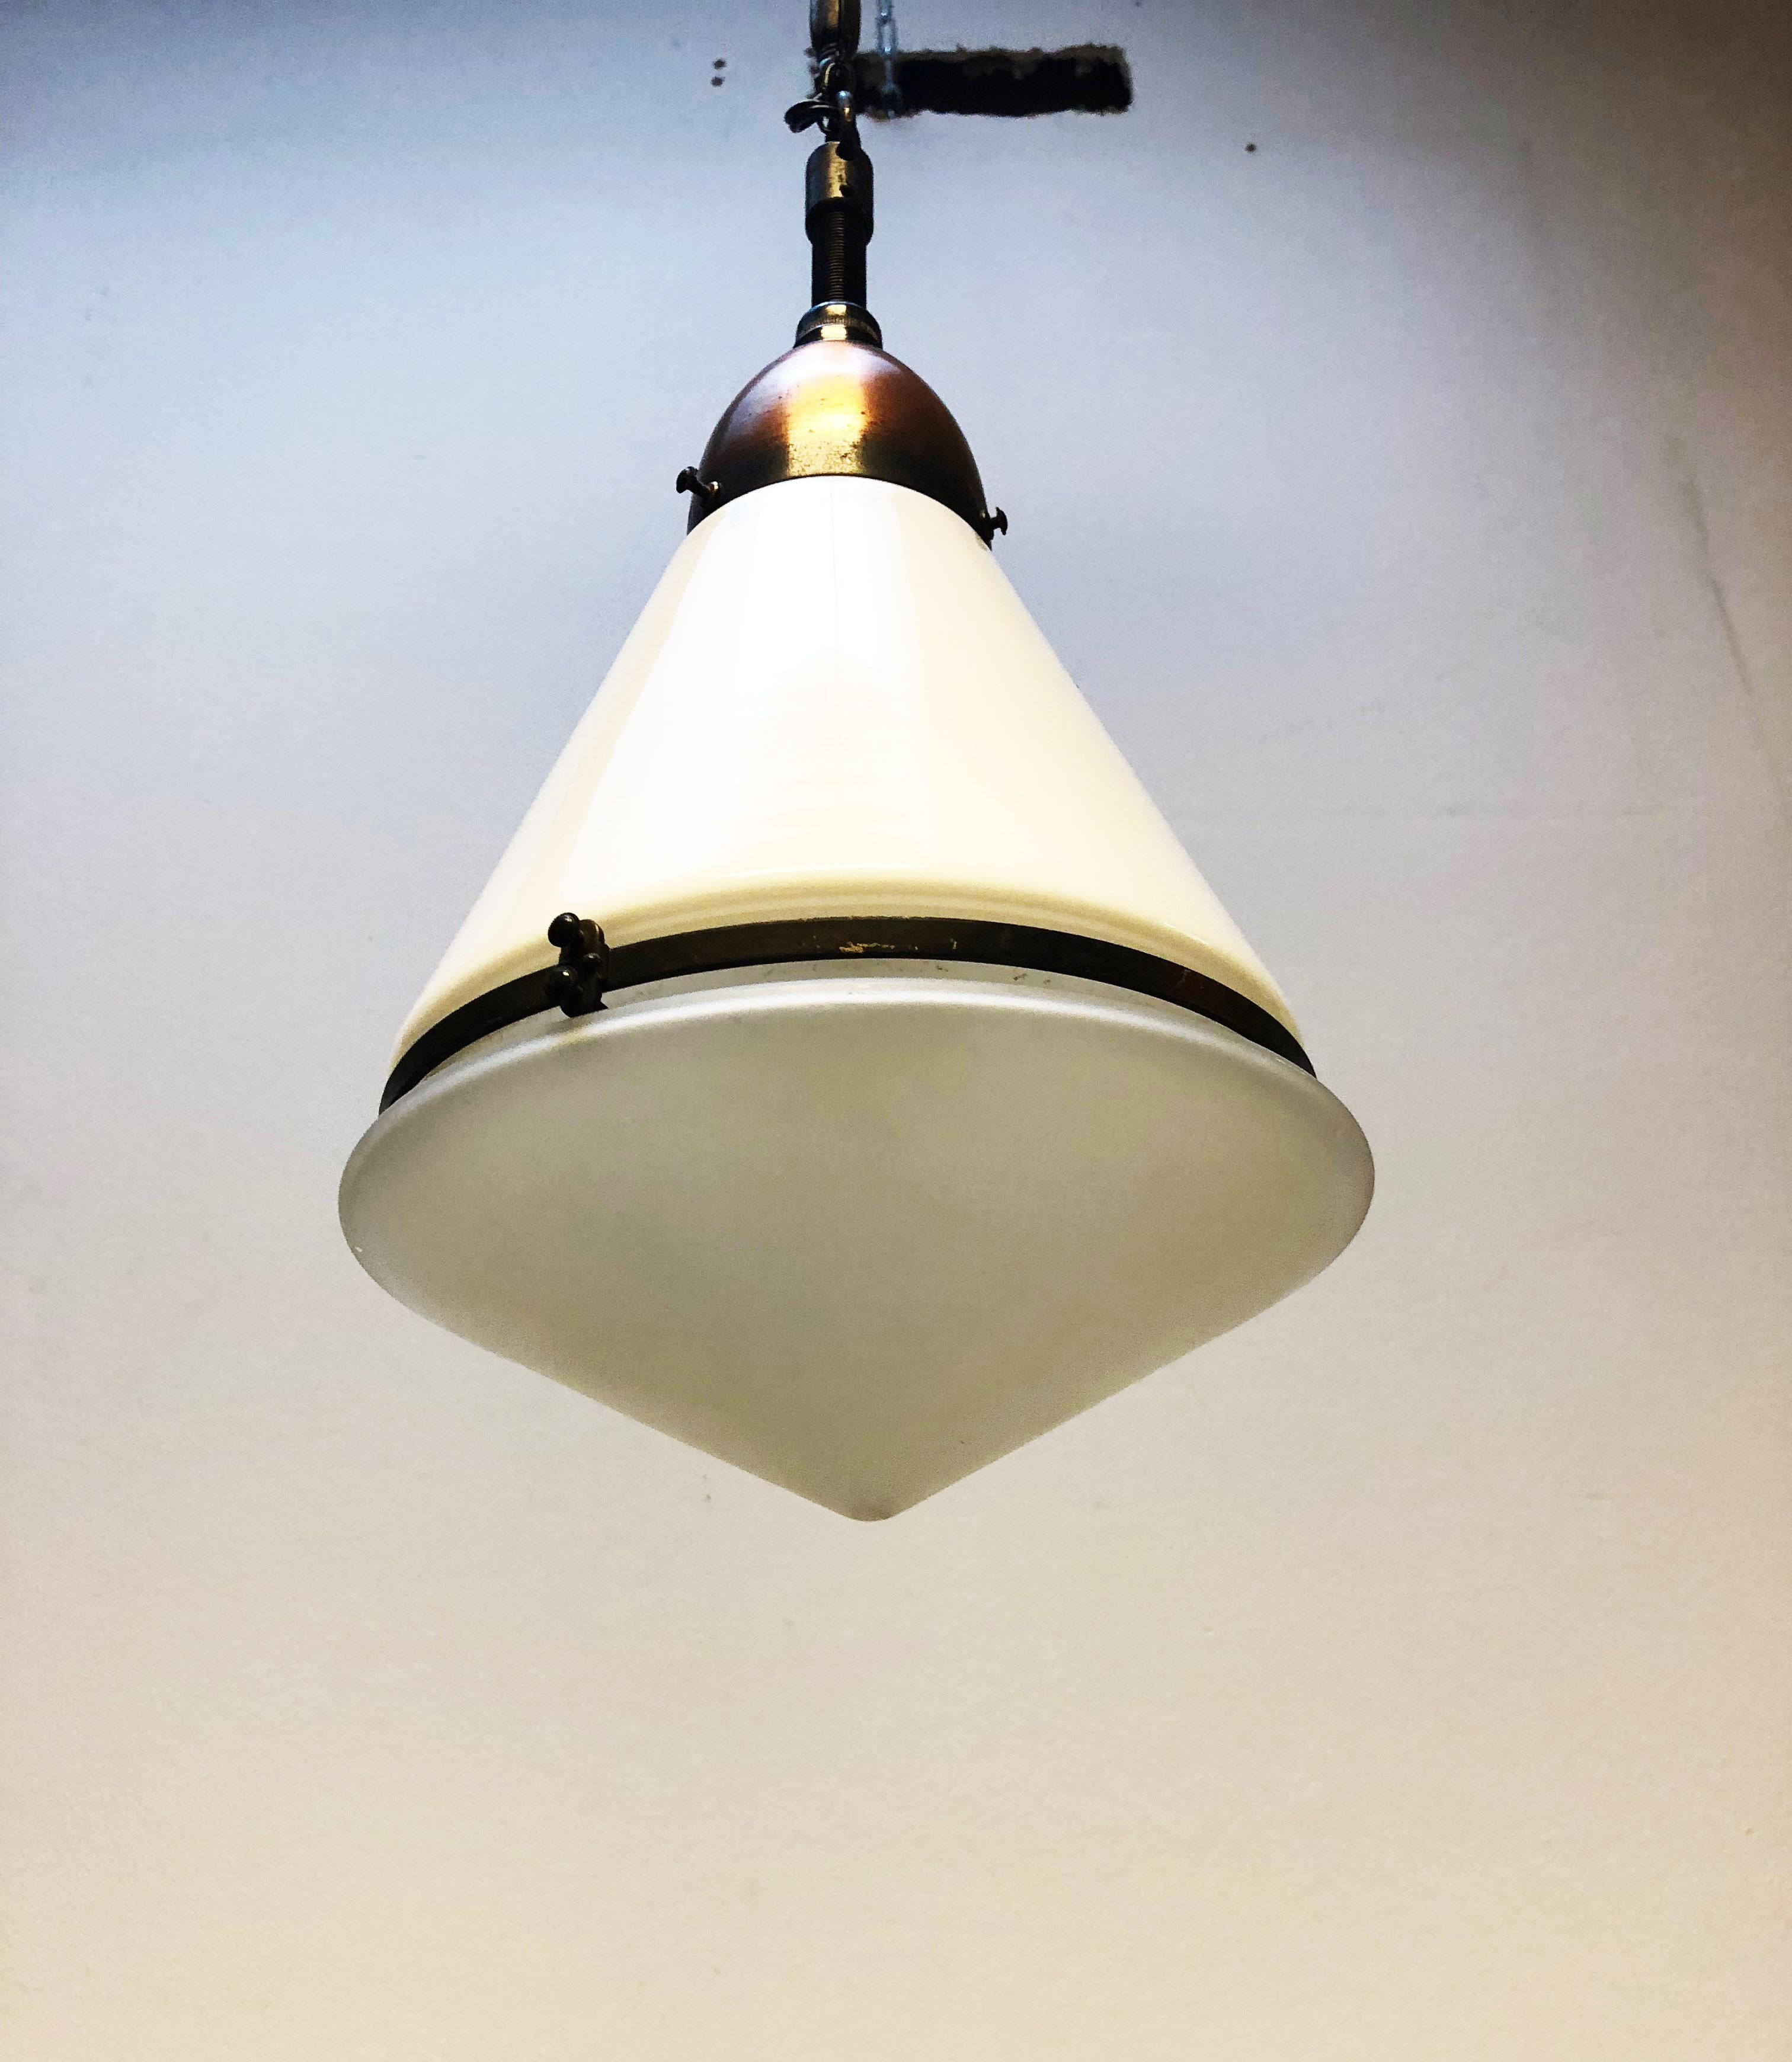 German Luzette Pendant by Peter Behrens for AEG